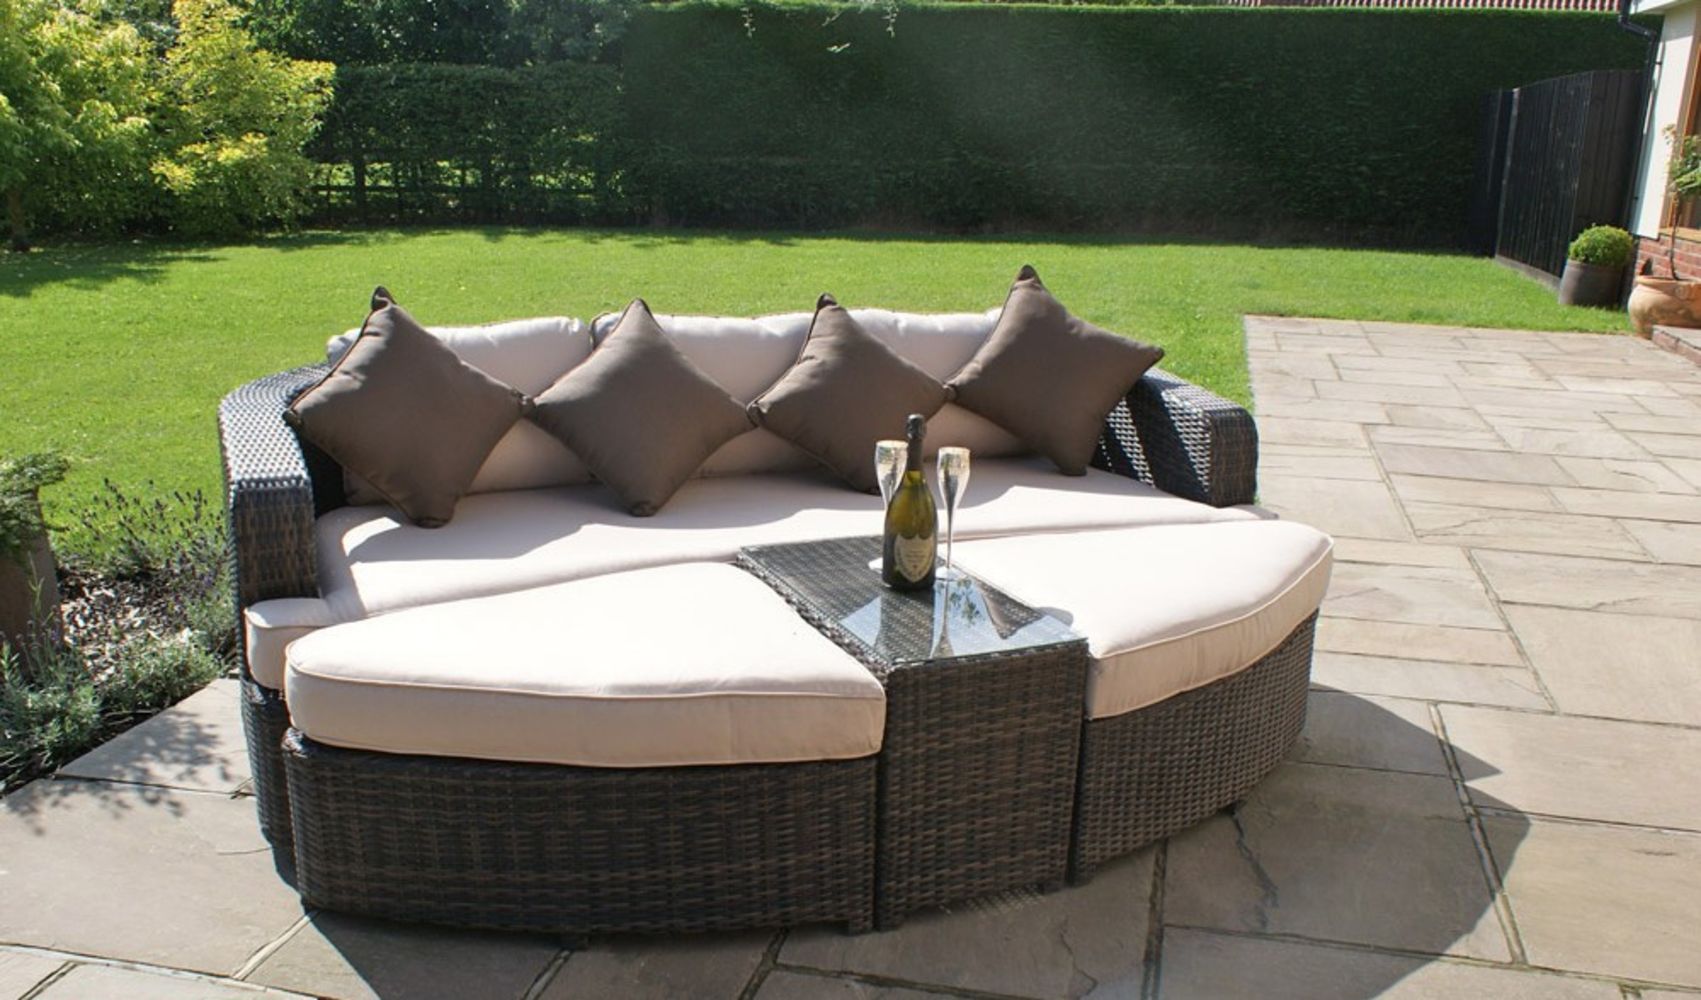 Brand New Rattan Garden Furniture: Exclusive Range Including Dining Sets, Day Beds, Sofa Sets & Sun Loungers